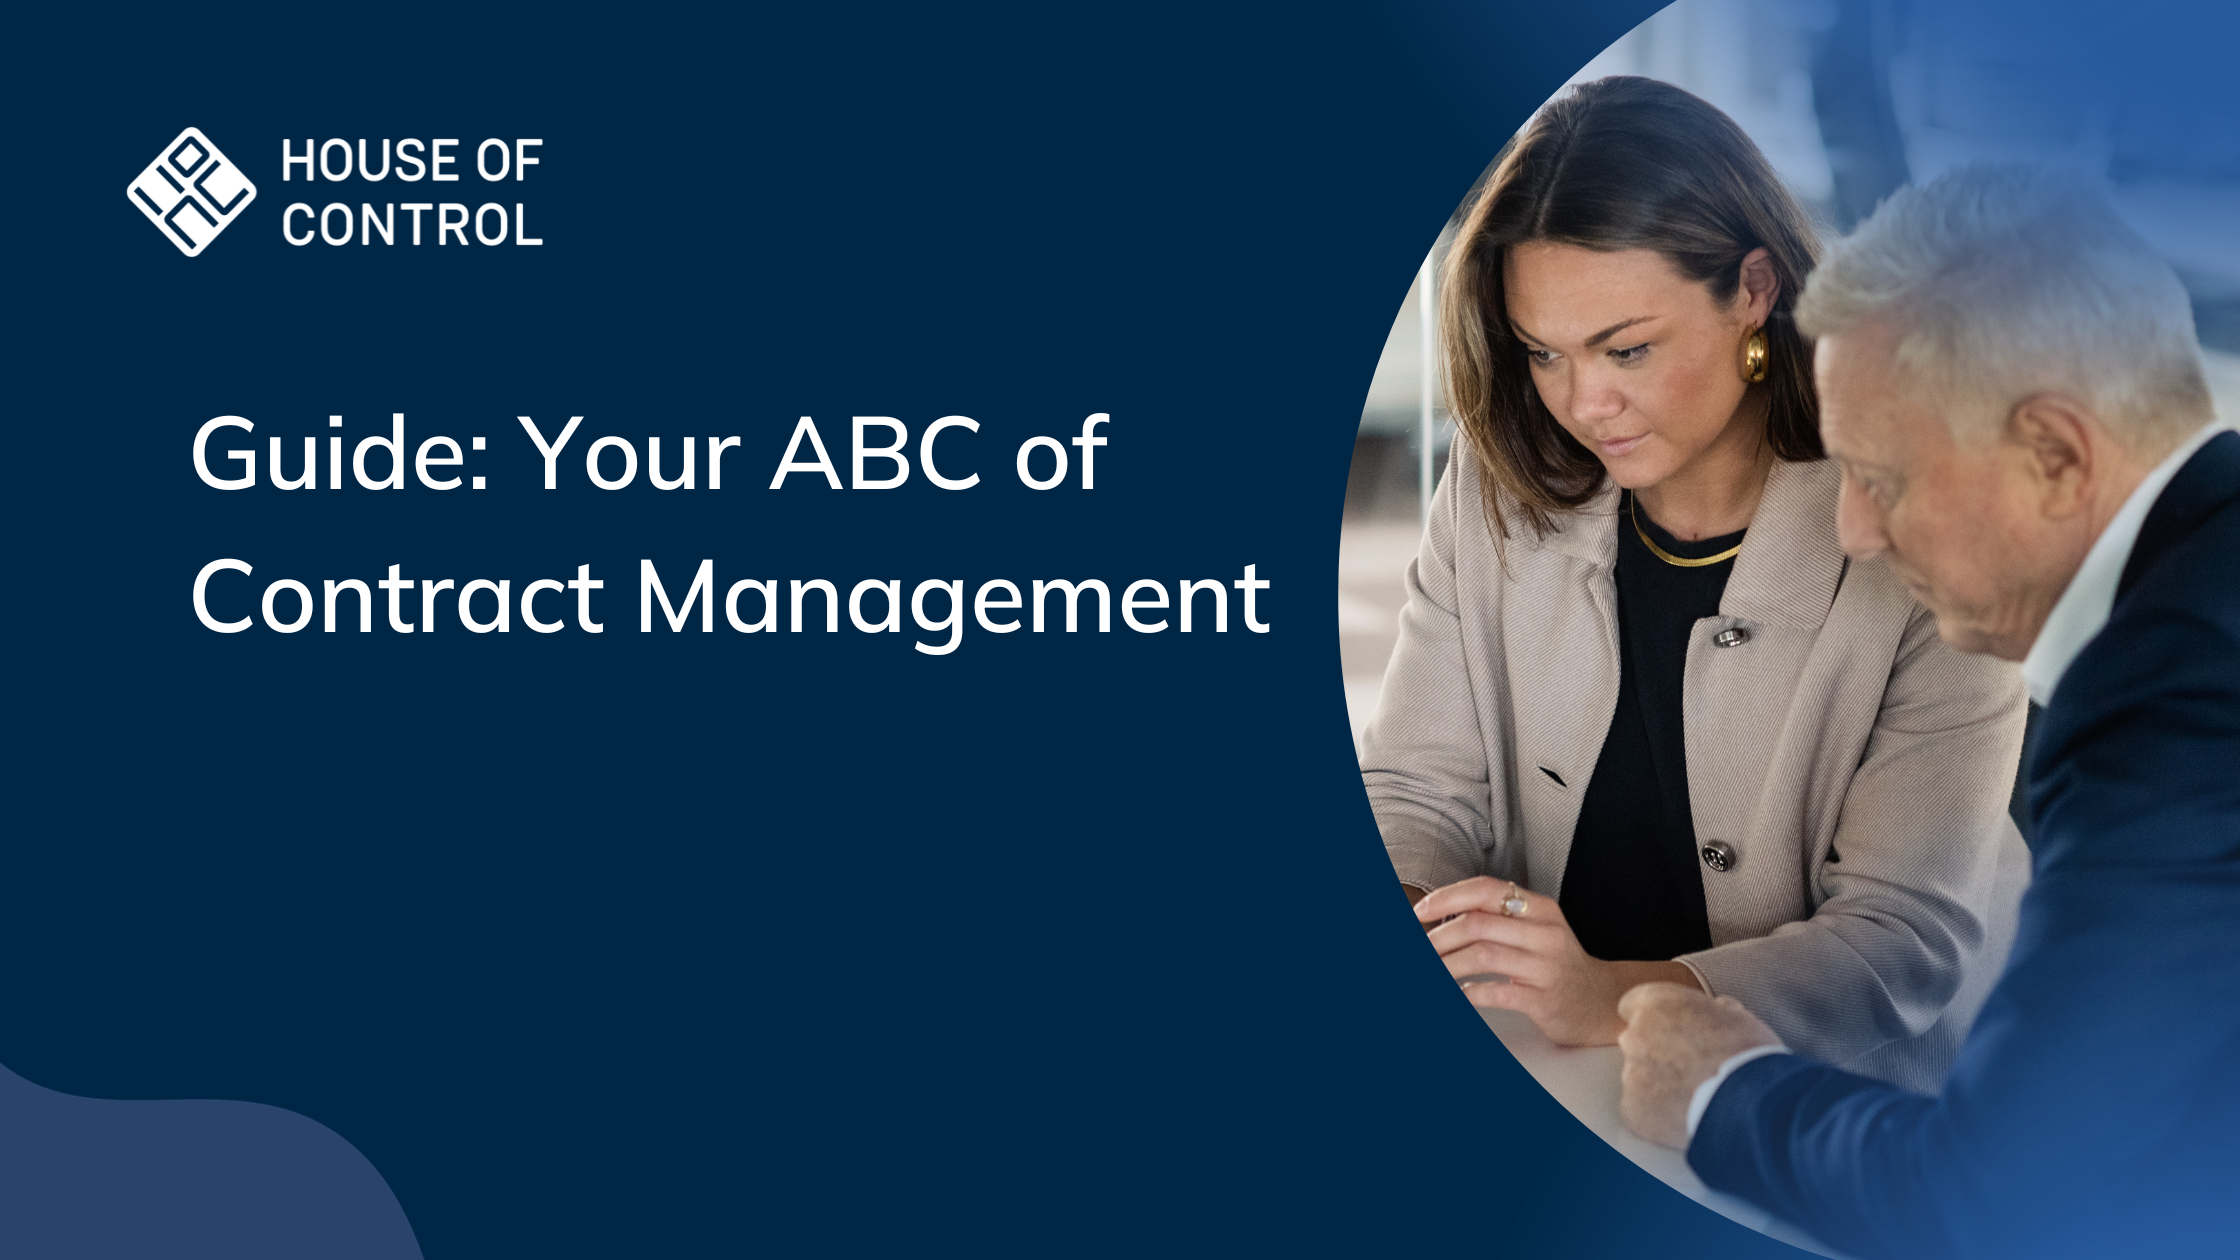 Your ABC of Contract Management